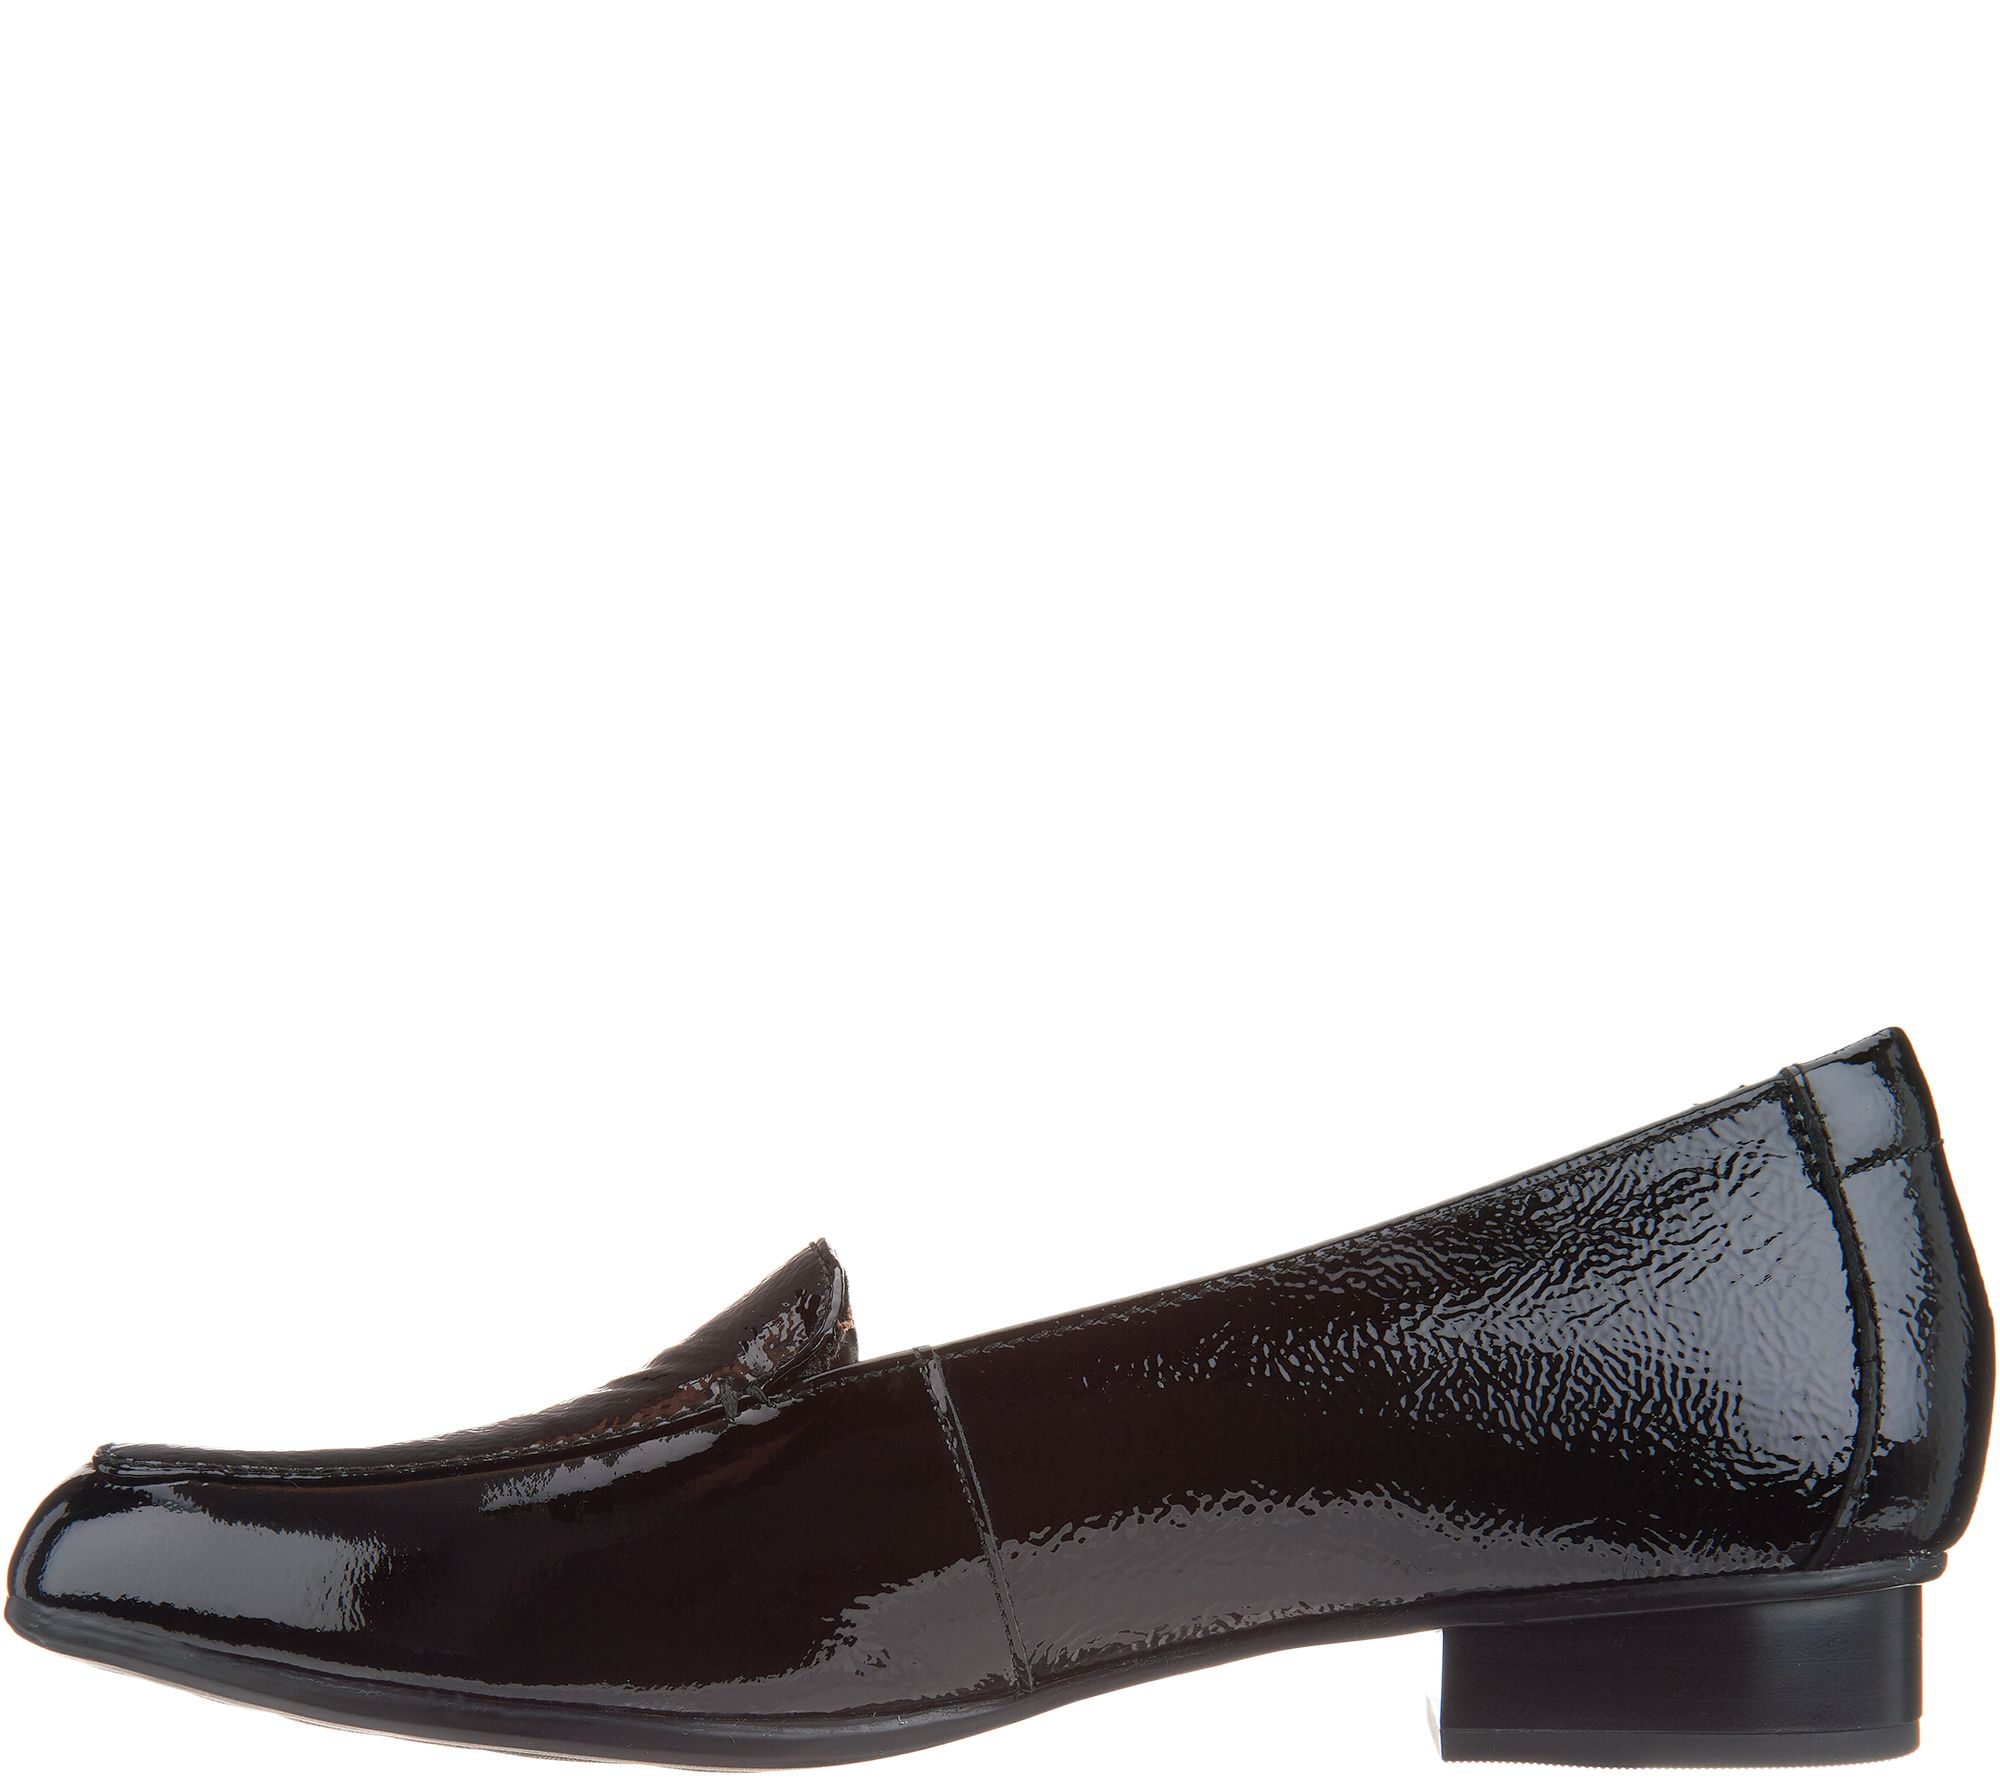 Clarks Collection Leather Slip-On Loafers - Juliet Lora - QVC.com